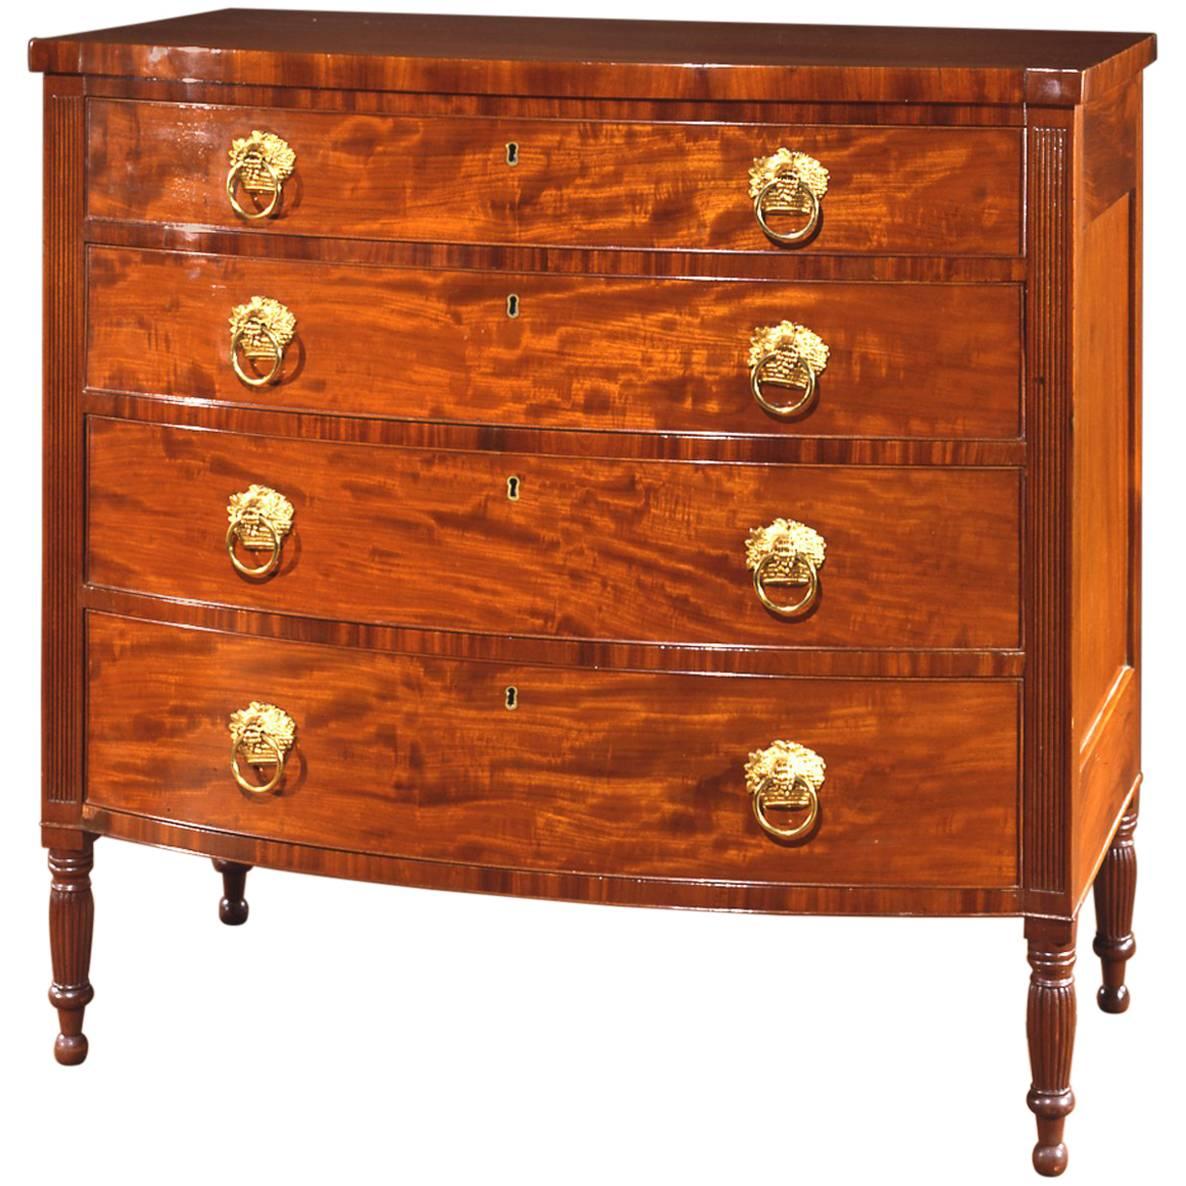 Late Federal Chest of Drawers in the Sheraton Taste